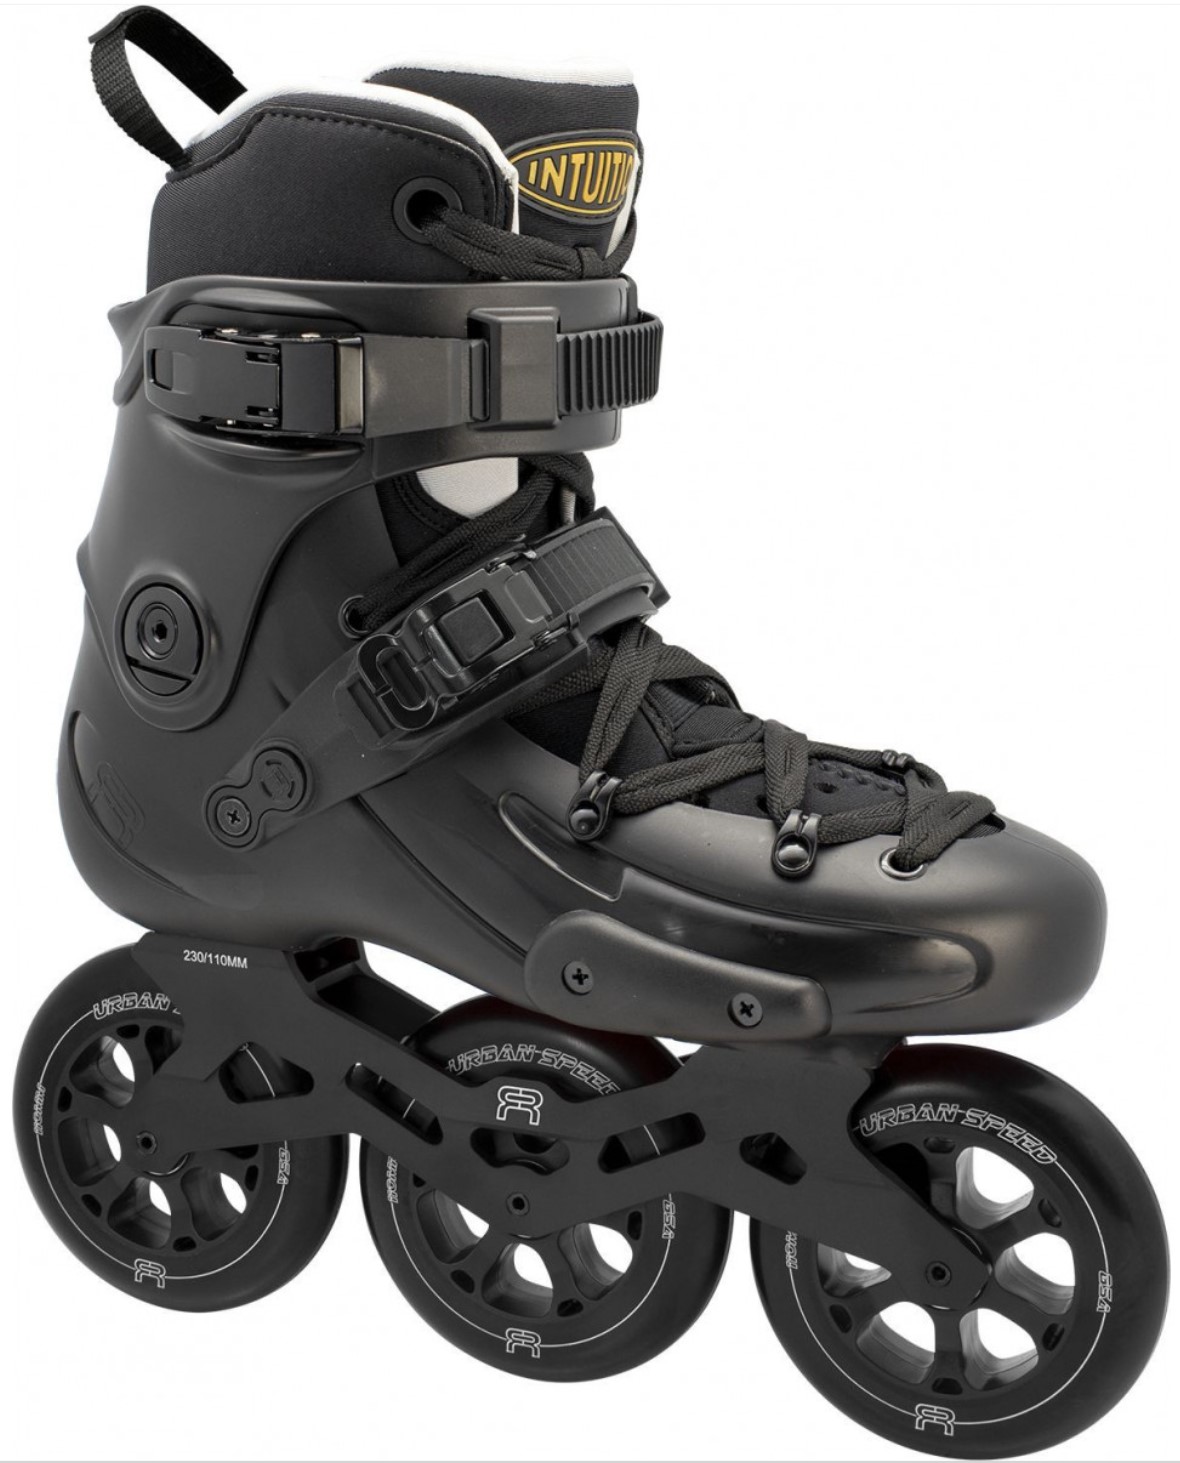 black FR1 310 Intuition inline skate for urban skating with three black wheels of 110 mm diameter